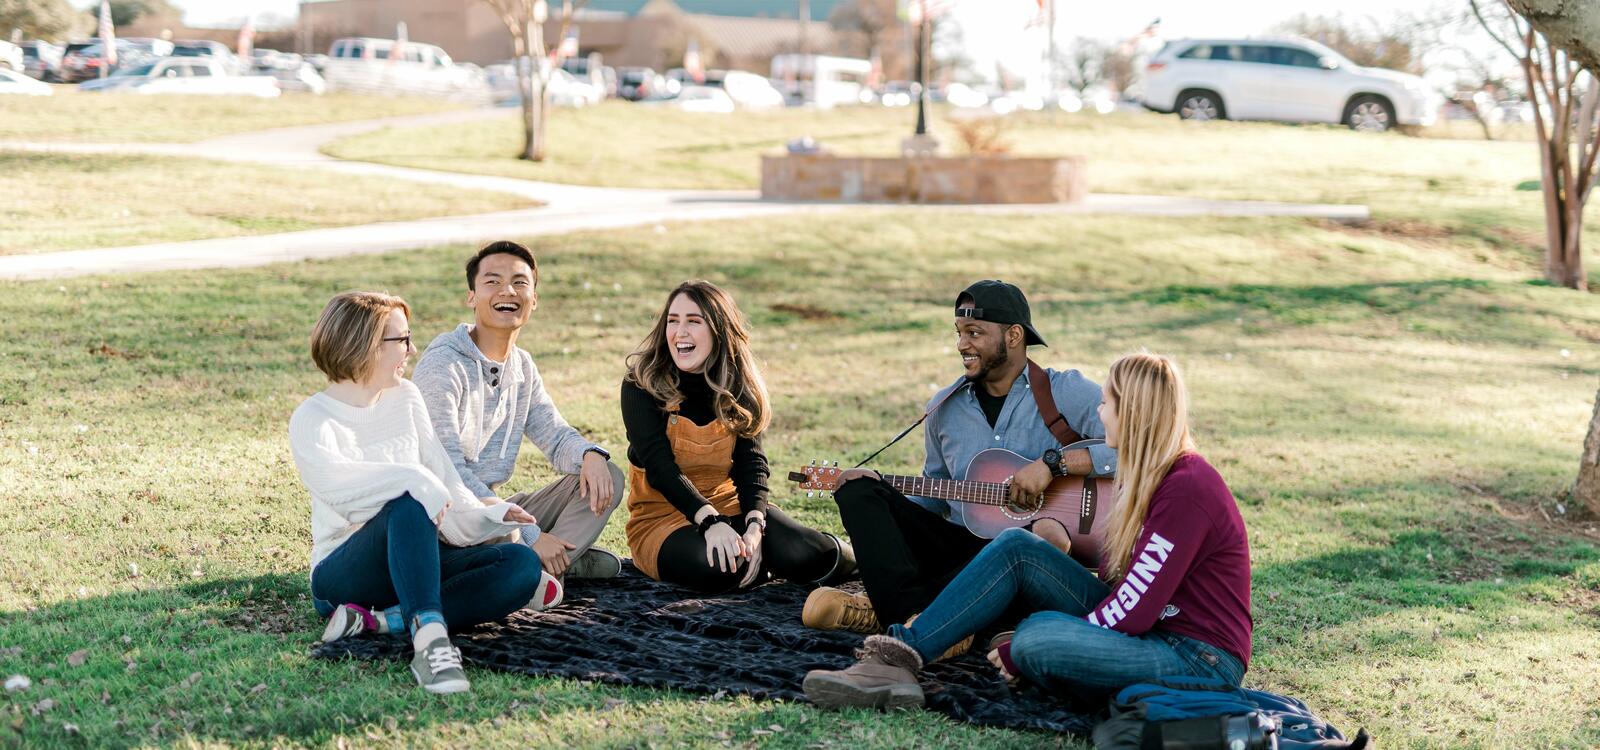 Five students sit under a tree on a blanket laughing and singing as one studentplays the guitar